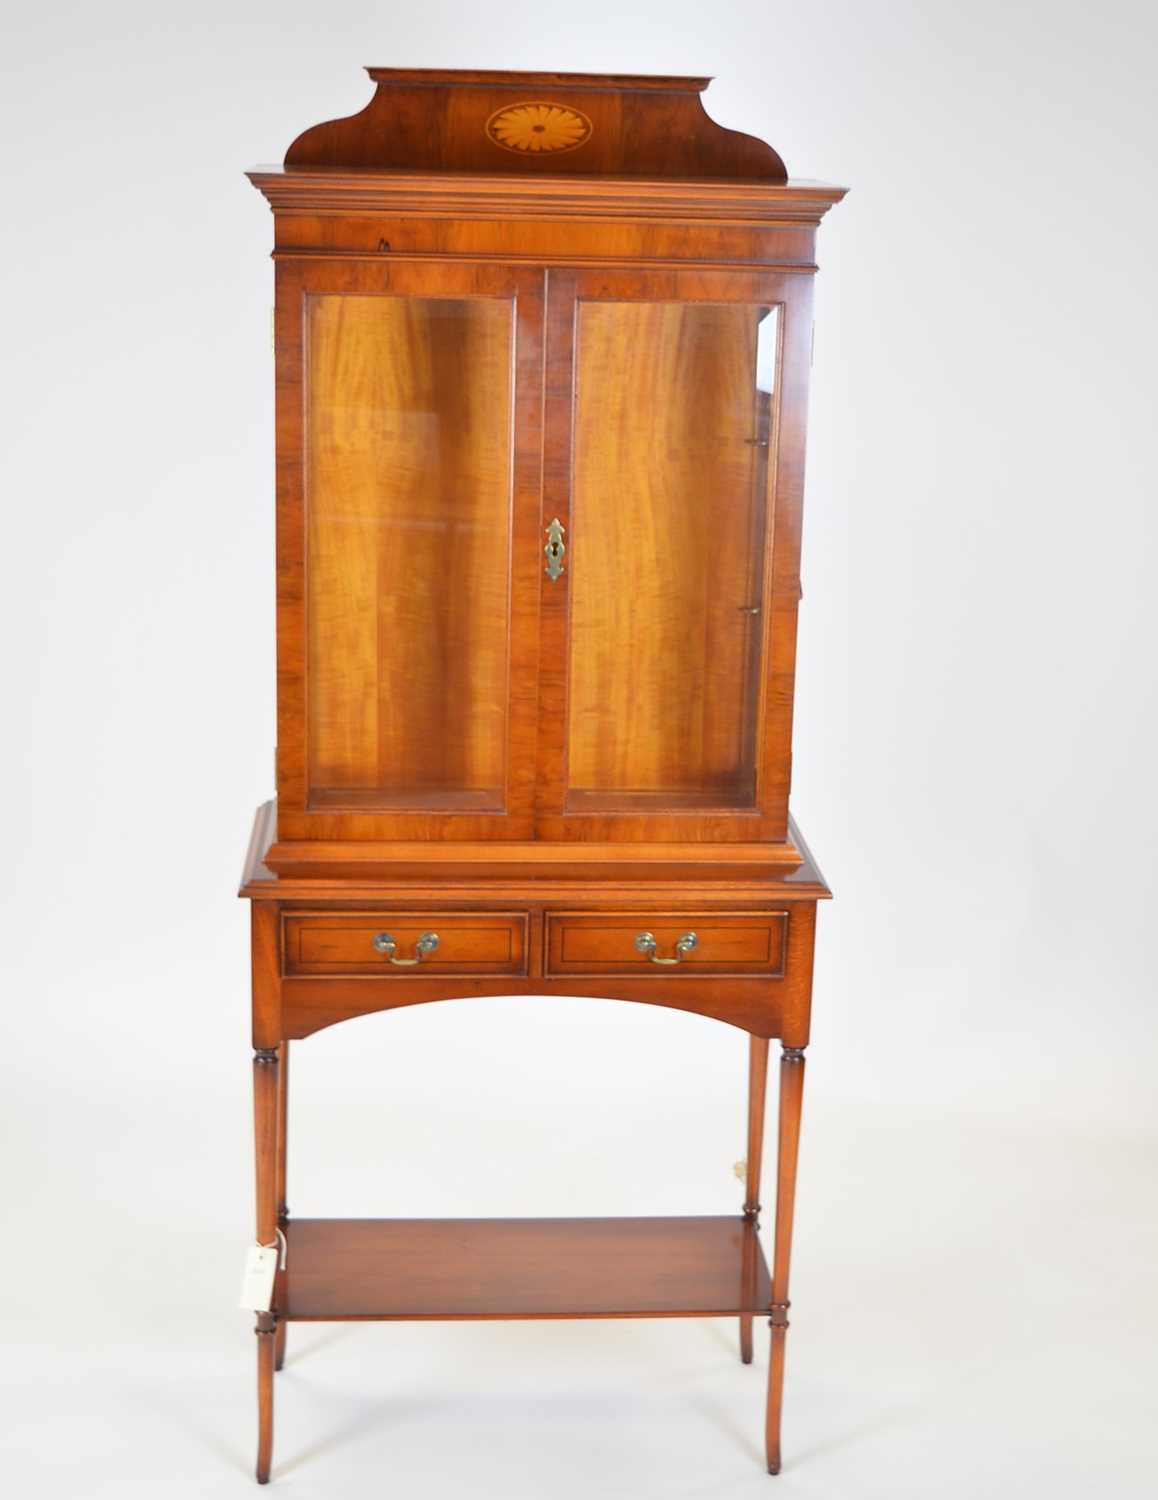 Lot 423 - Yew wood display cabinet, chest and side tables.